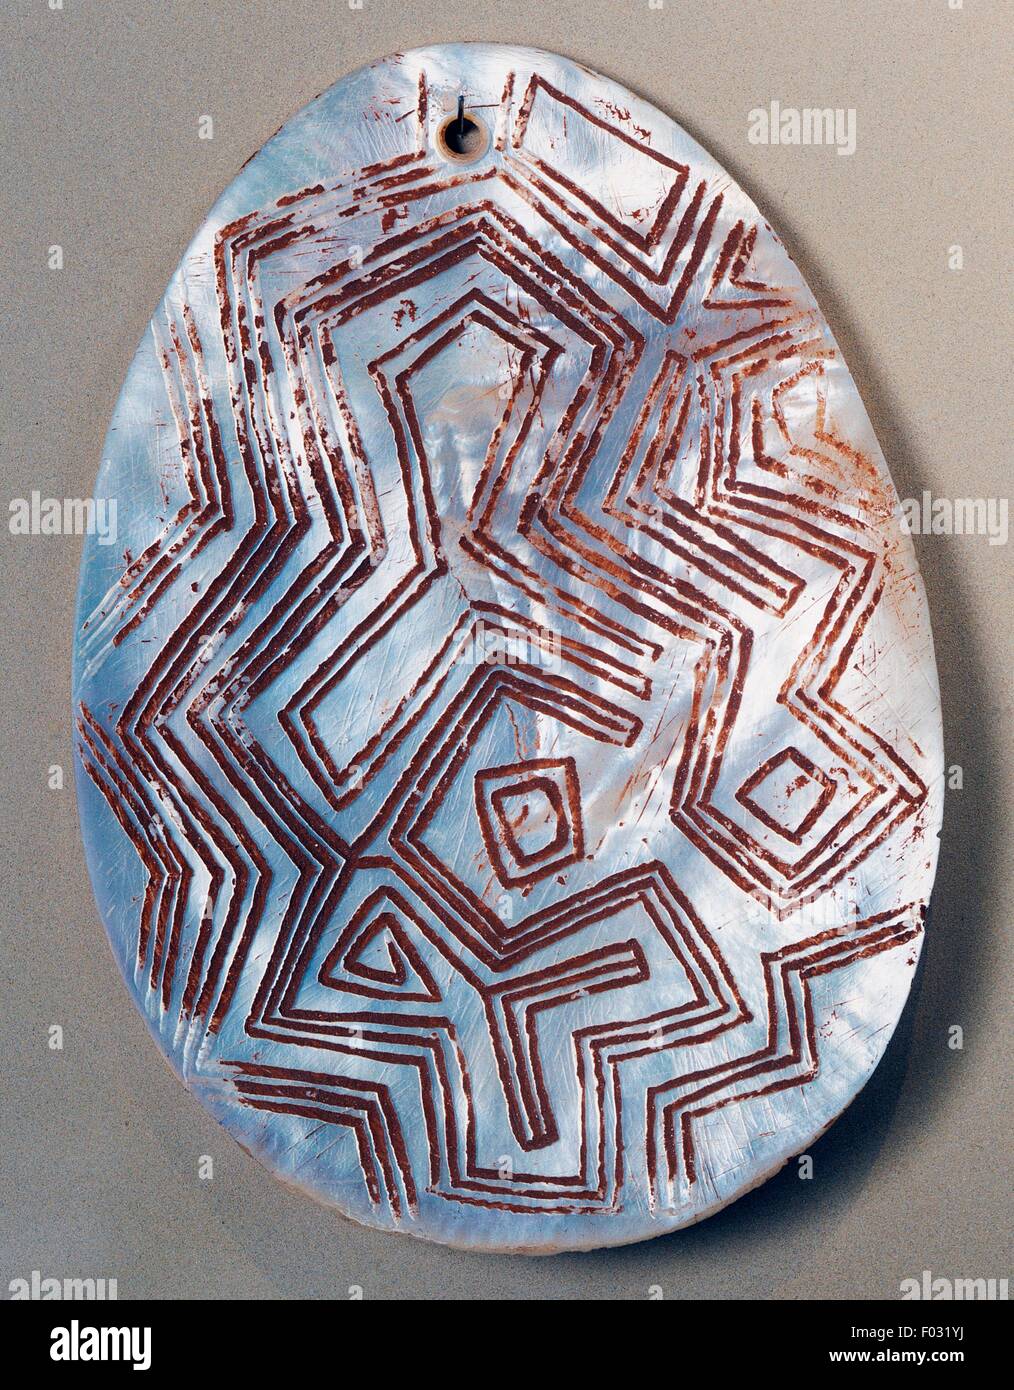 Maban, men's g-string in mother of pearl with engraved patterns and coated in red ochre, Pitjantjara, Australia. Stock Photo